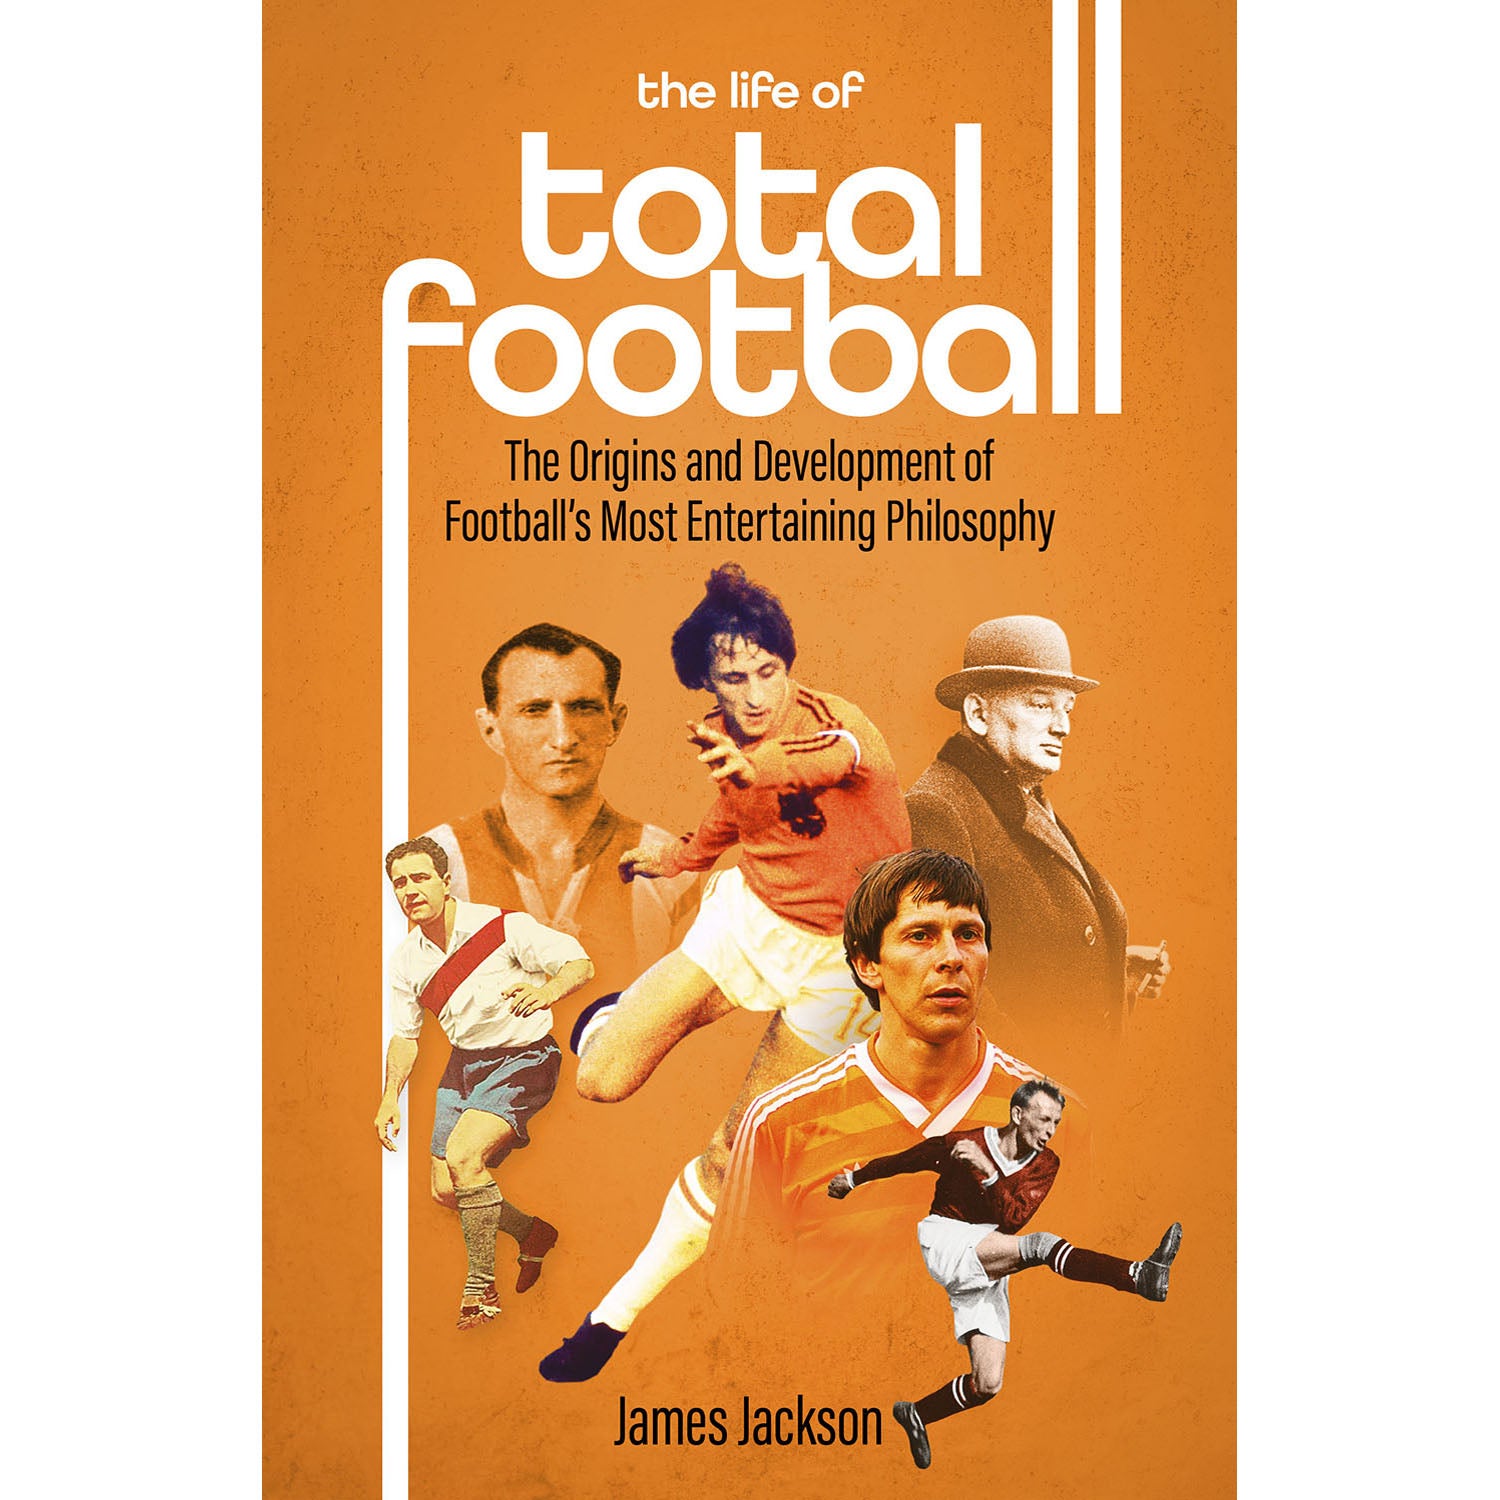 The Life of Total Football – The Origins and Development of Football's Most Entertaining Philosophy